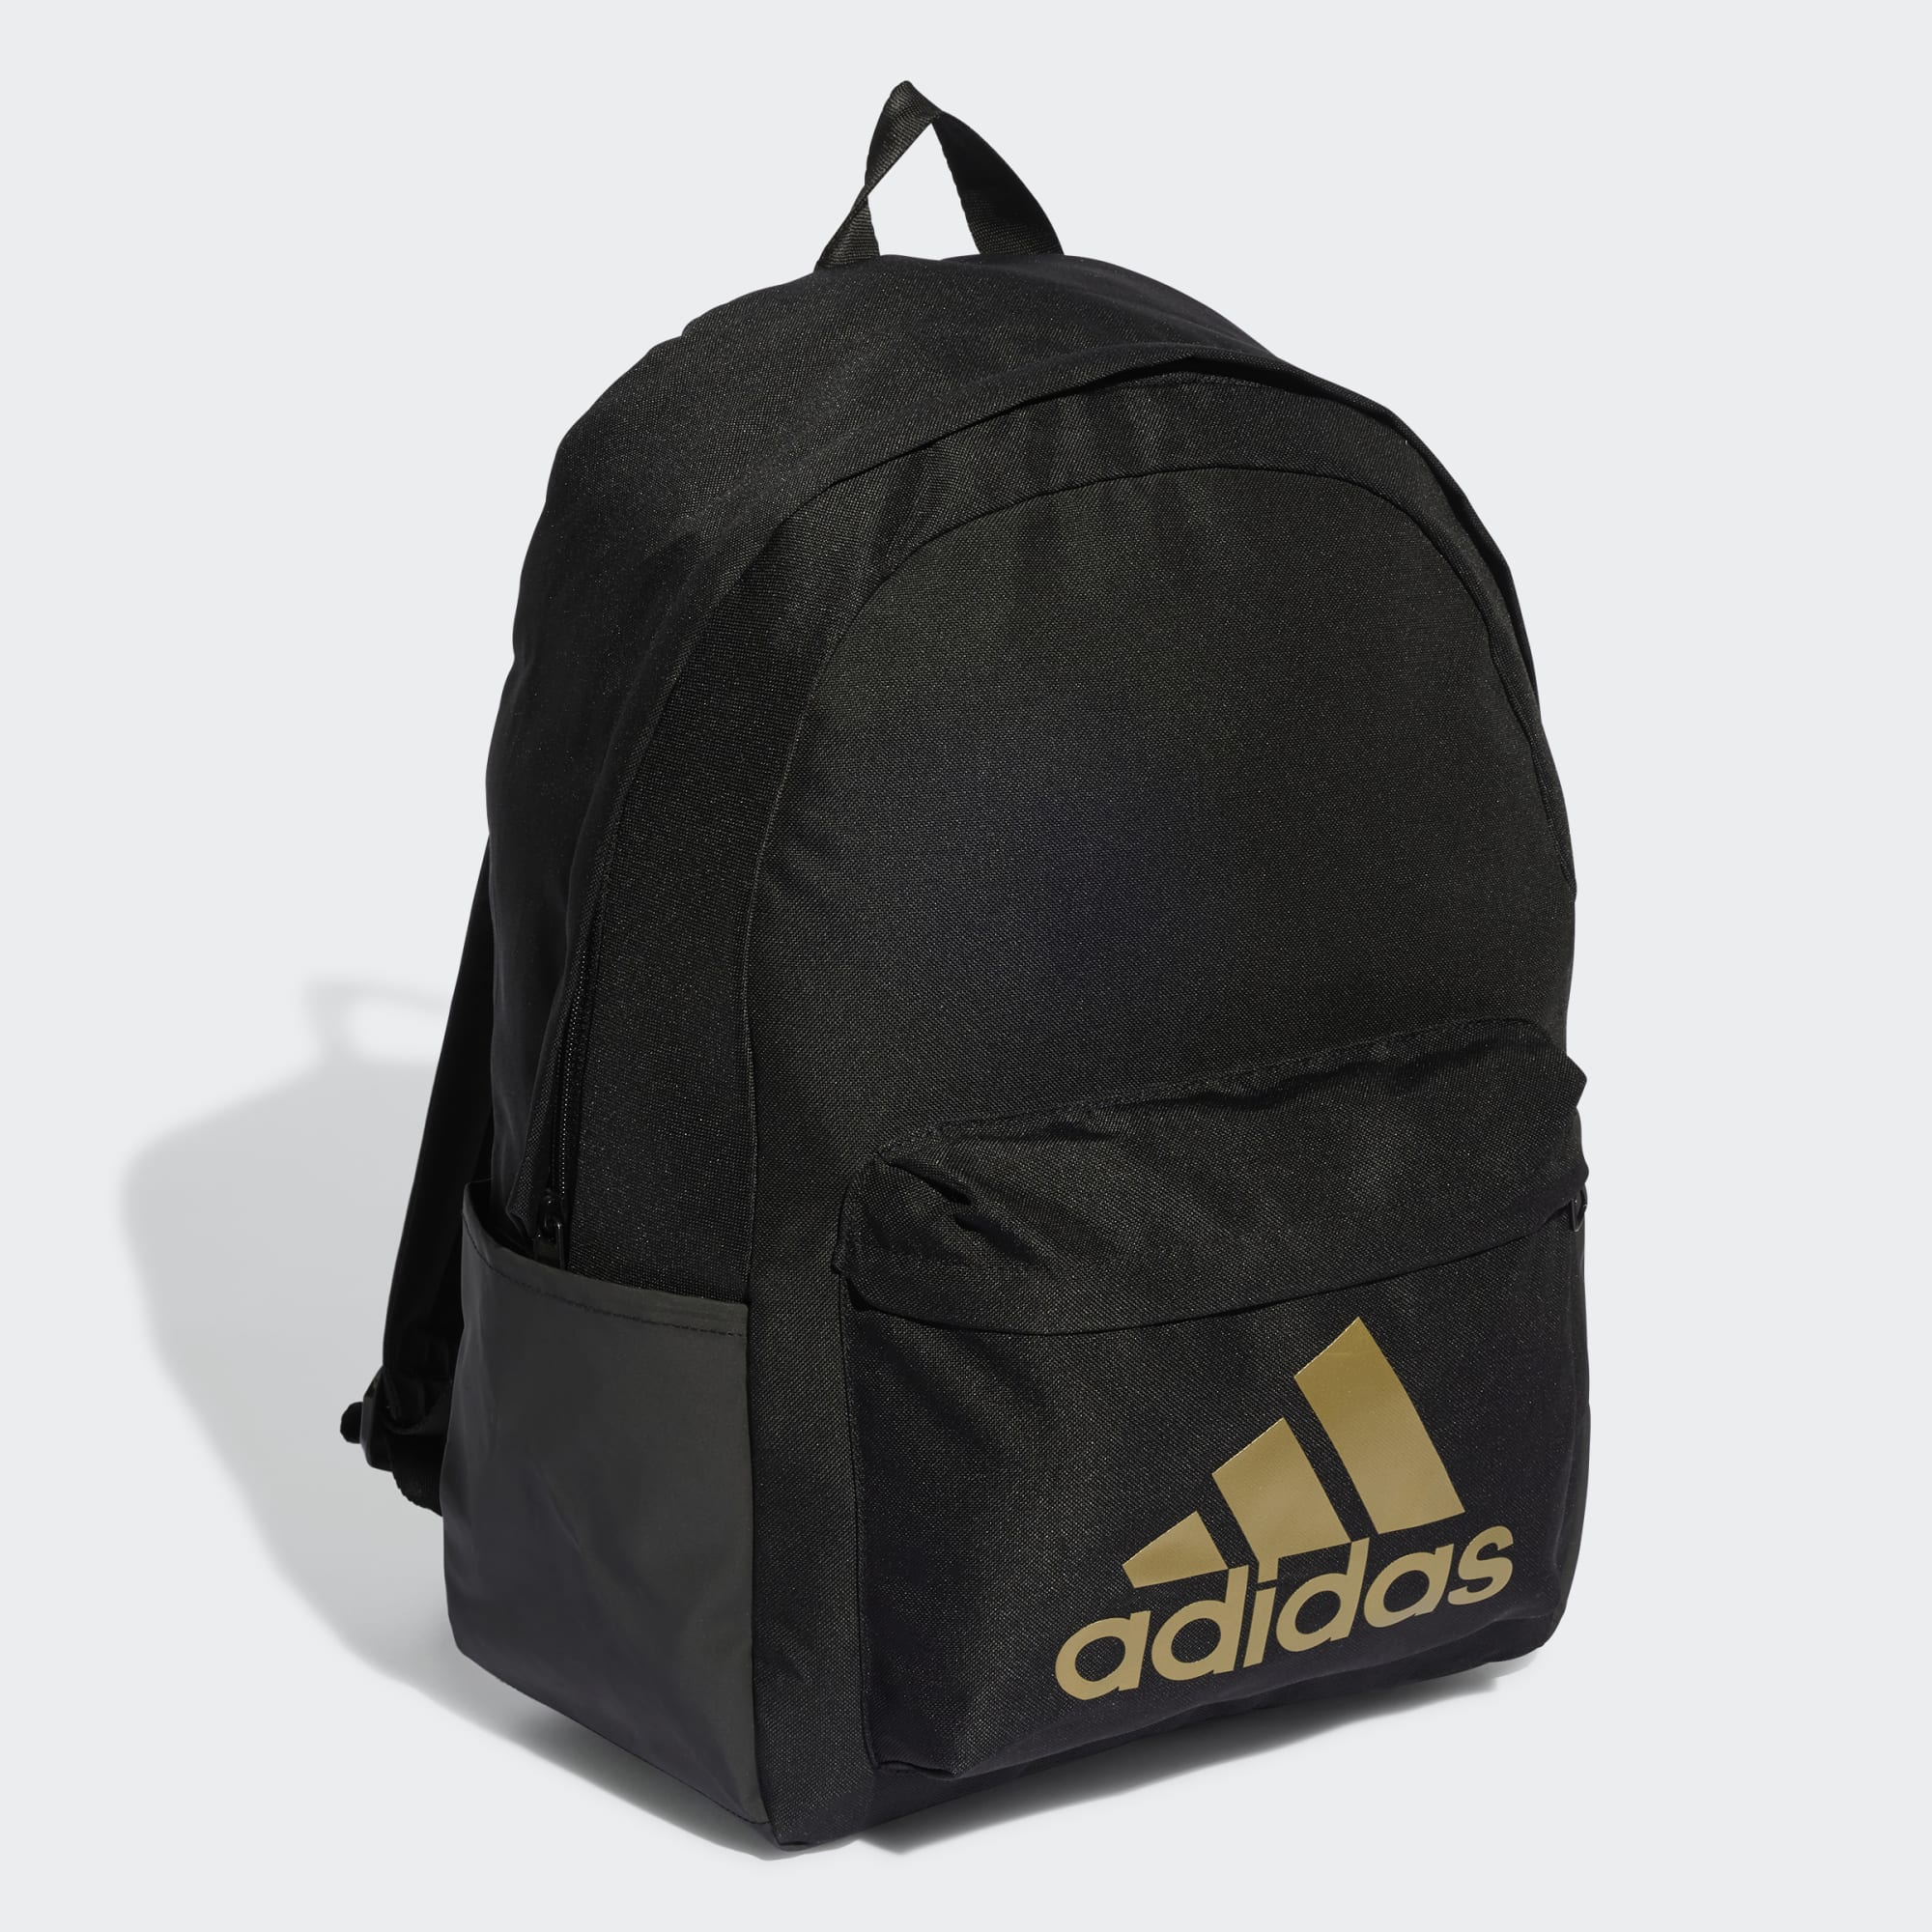 Adidas Unisex Motion BOS Graphic Backpack Bags Black School Travel Bag  IL5820